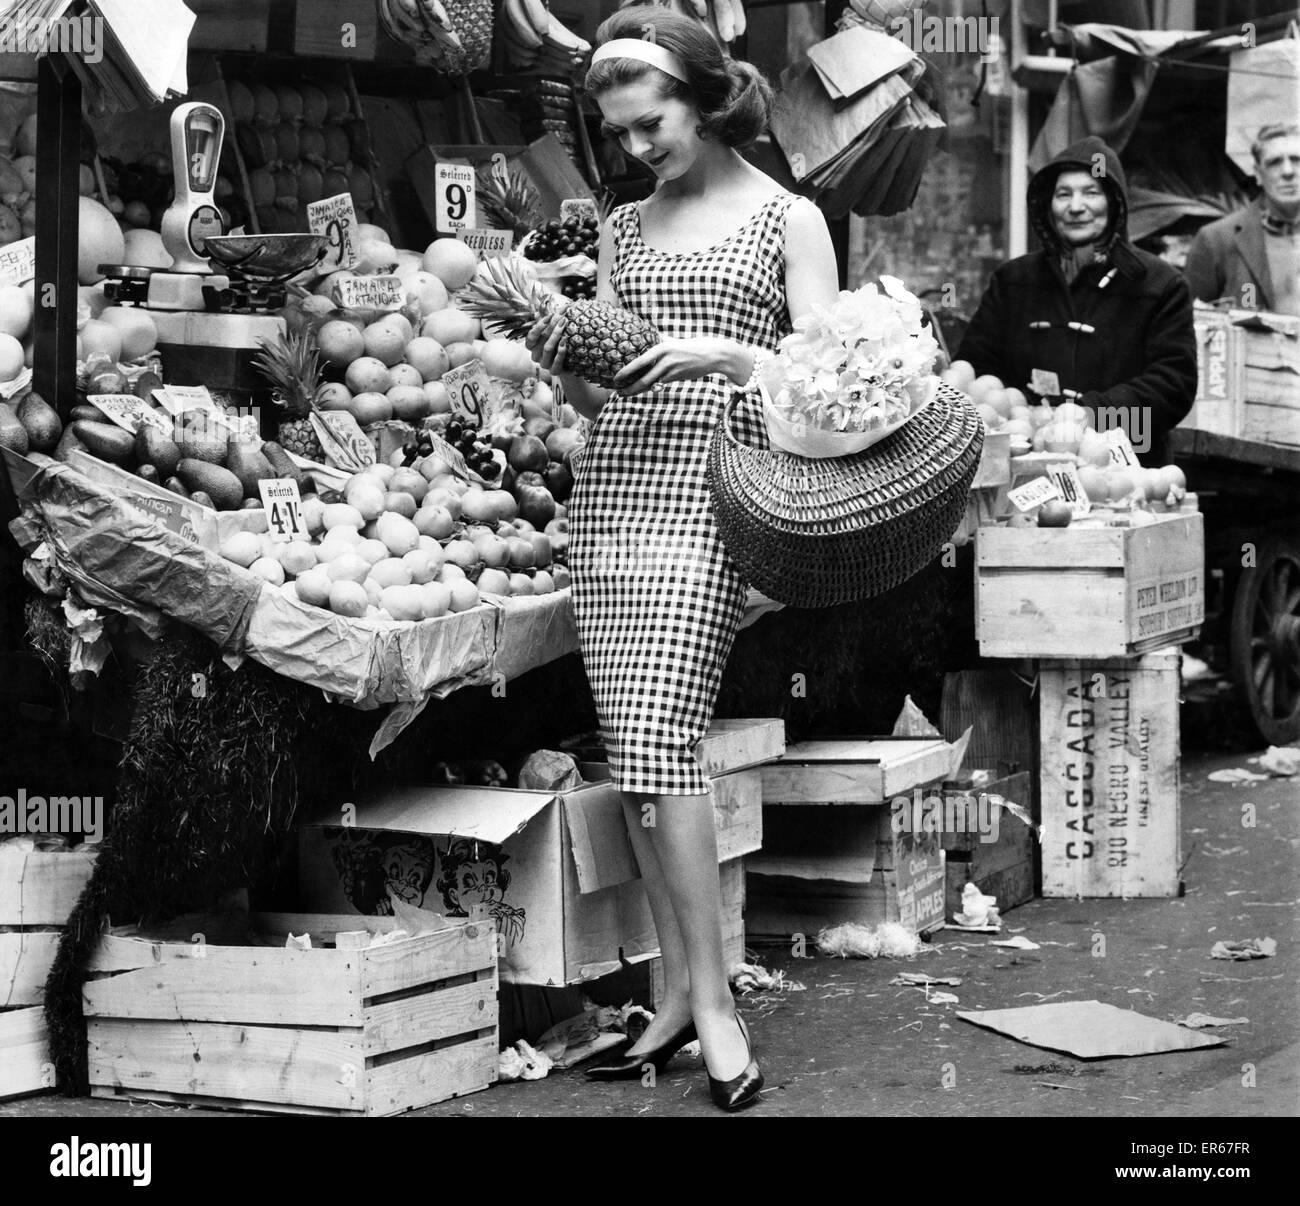 Model in market, buying groceries, May 1960 Stock Photo